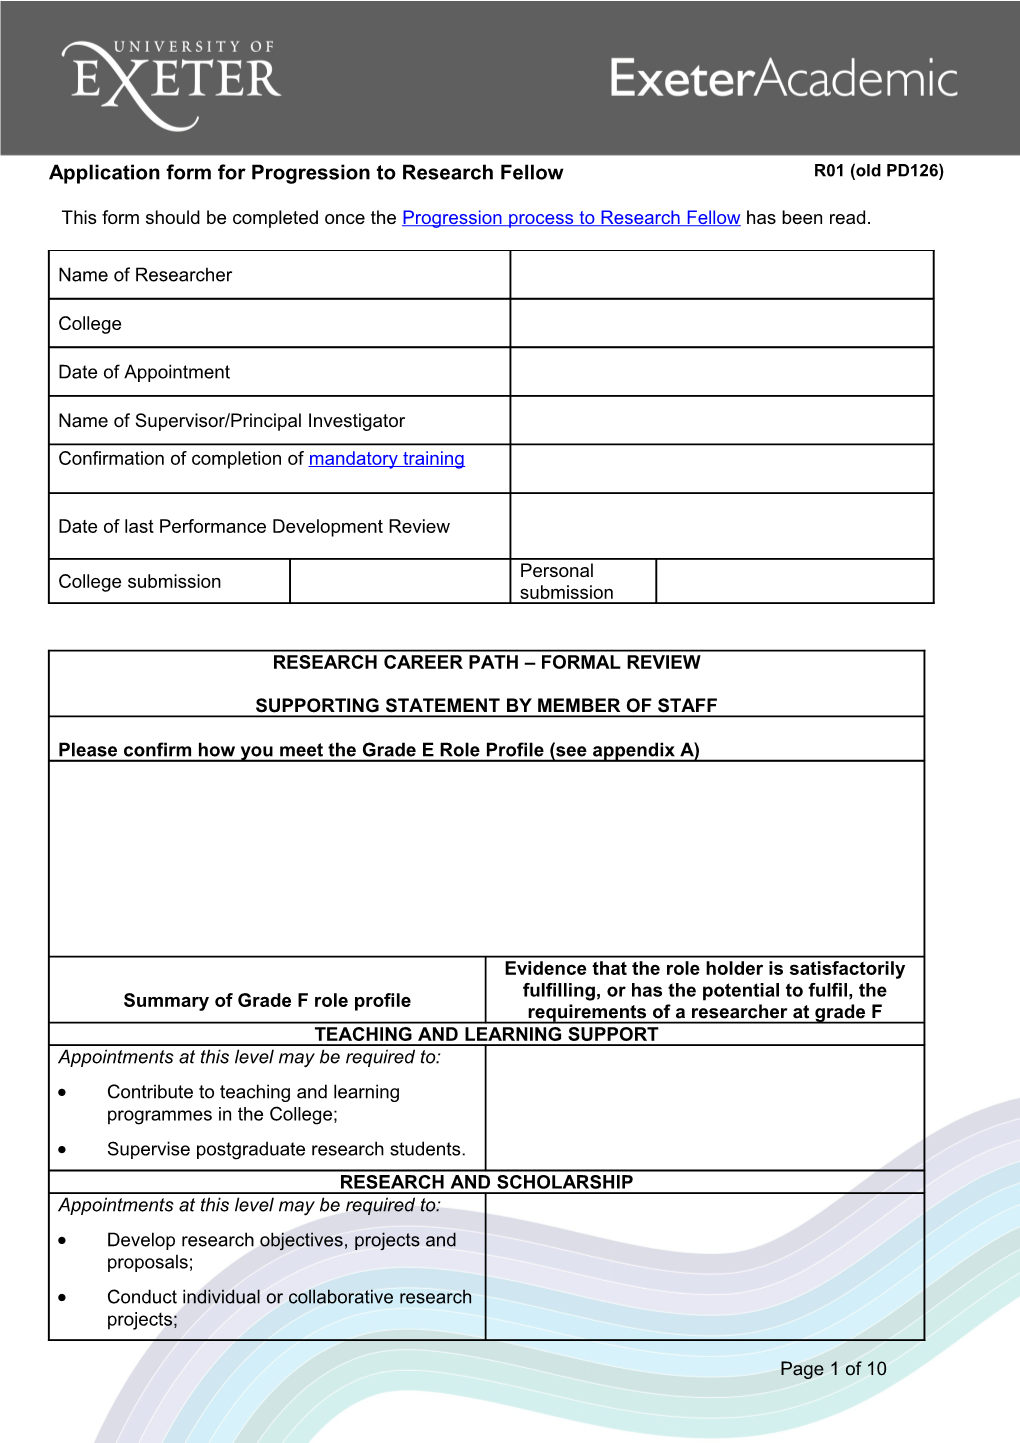 This Form Should Be Completed Once the Progression Process to Research Fellow Has Been Read